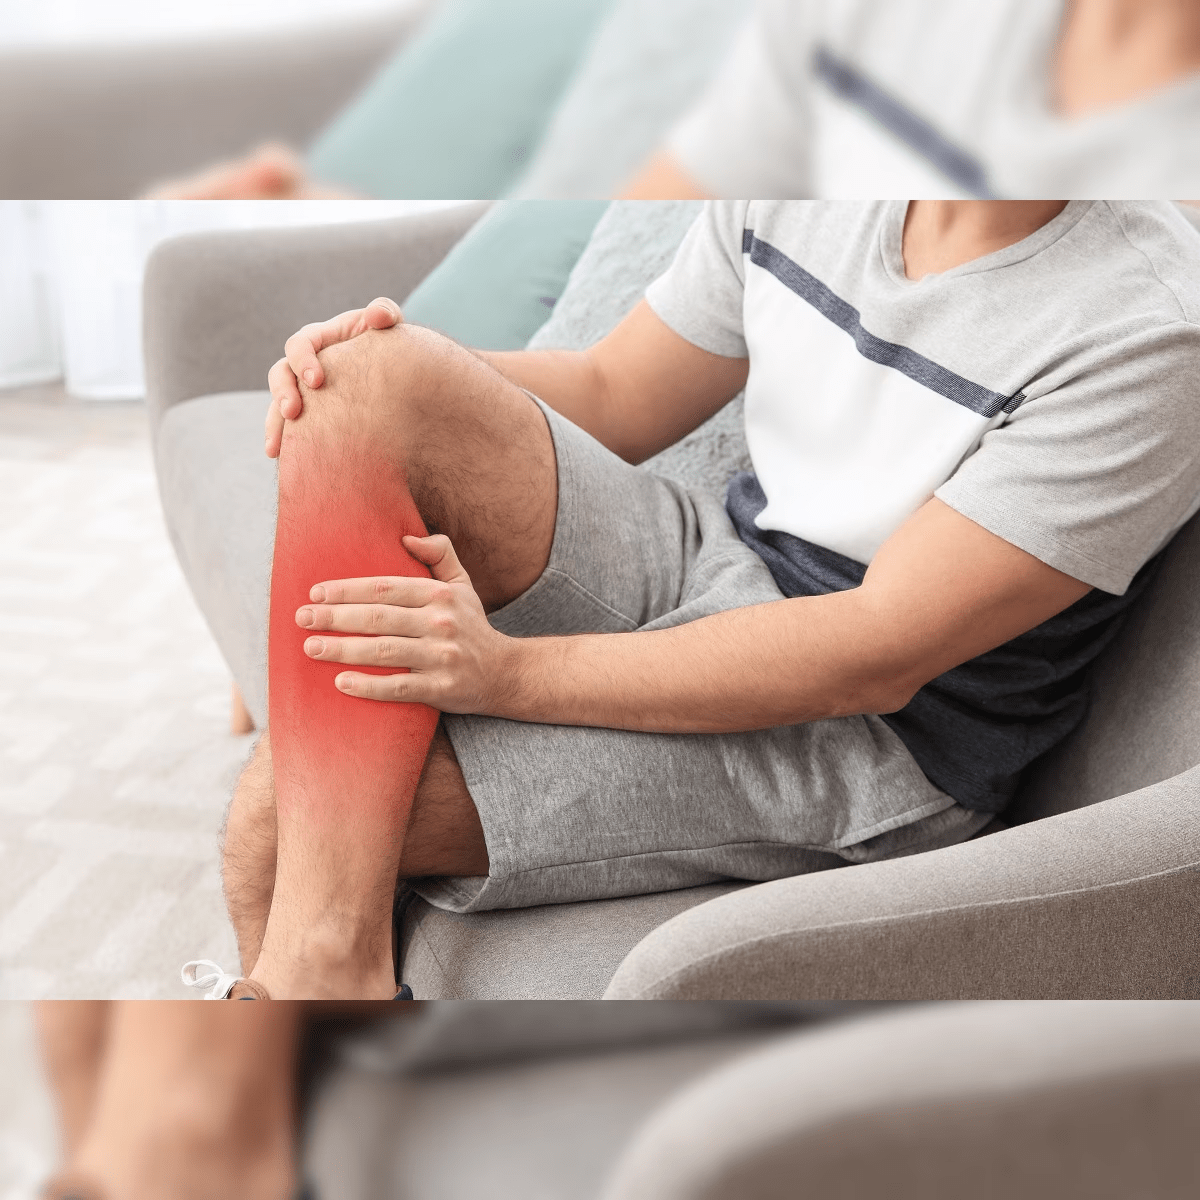 4 Home Remedies to Help You Relieve Leg Pain